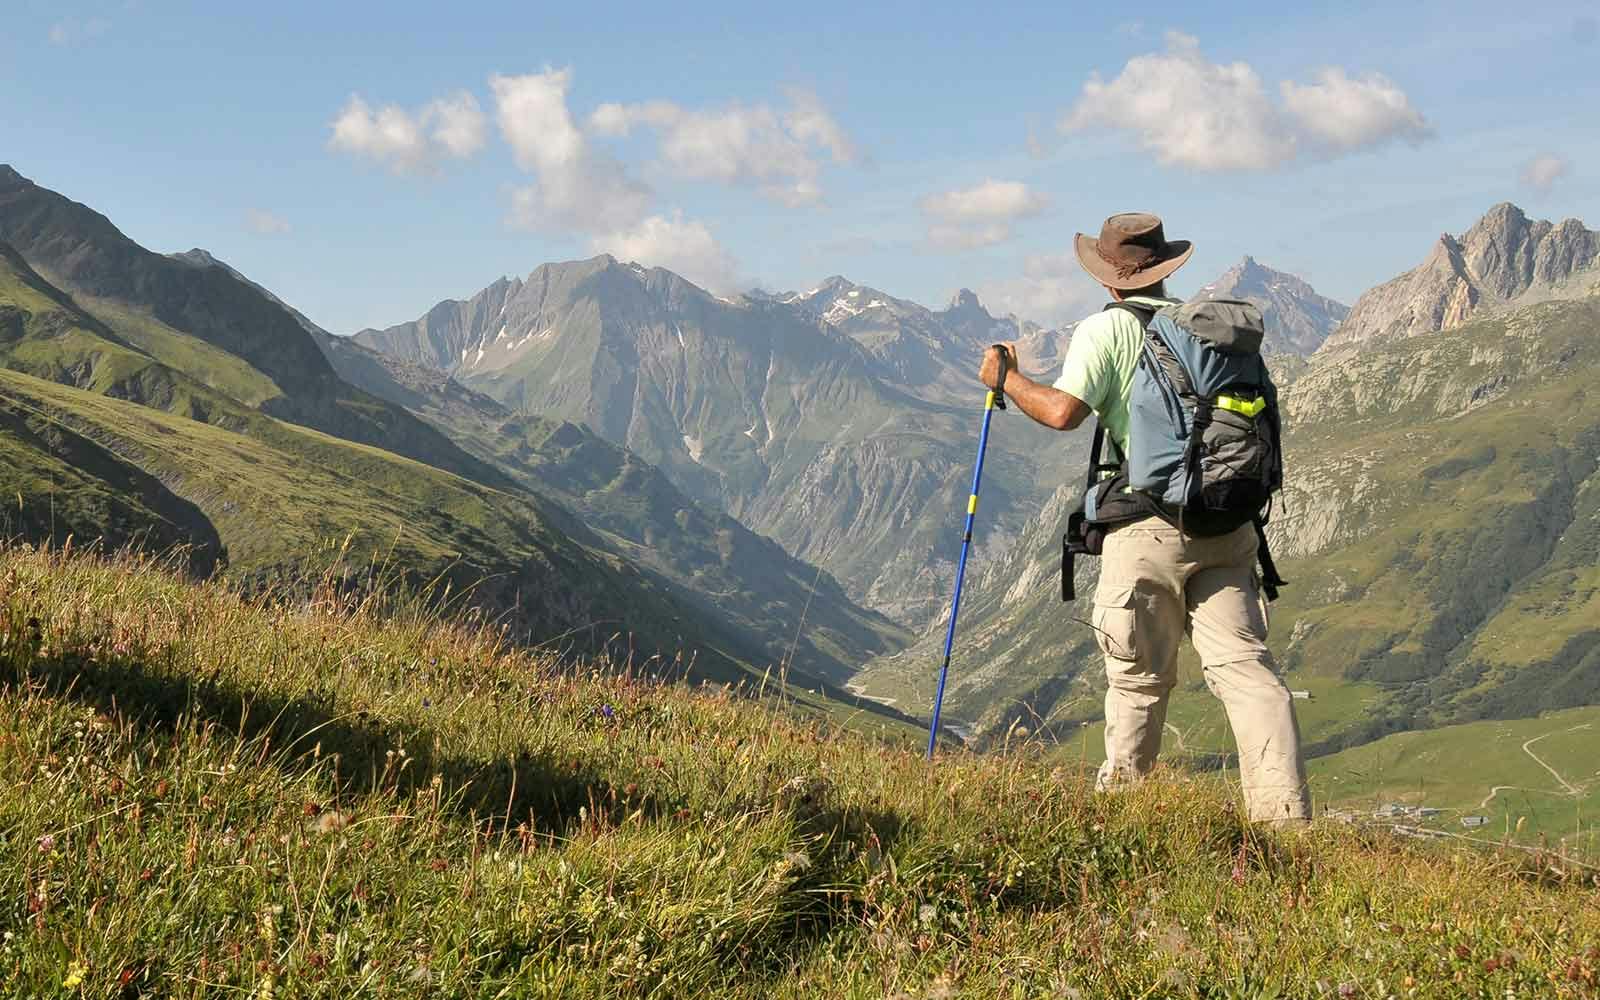 A man hiking in the mountains with a backpack.